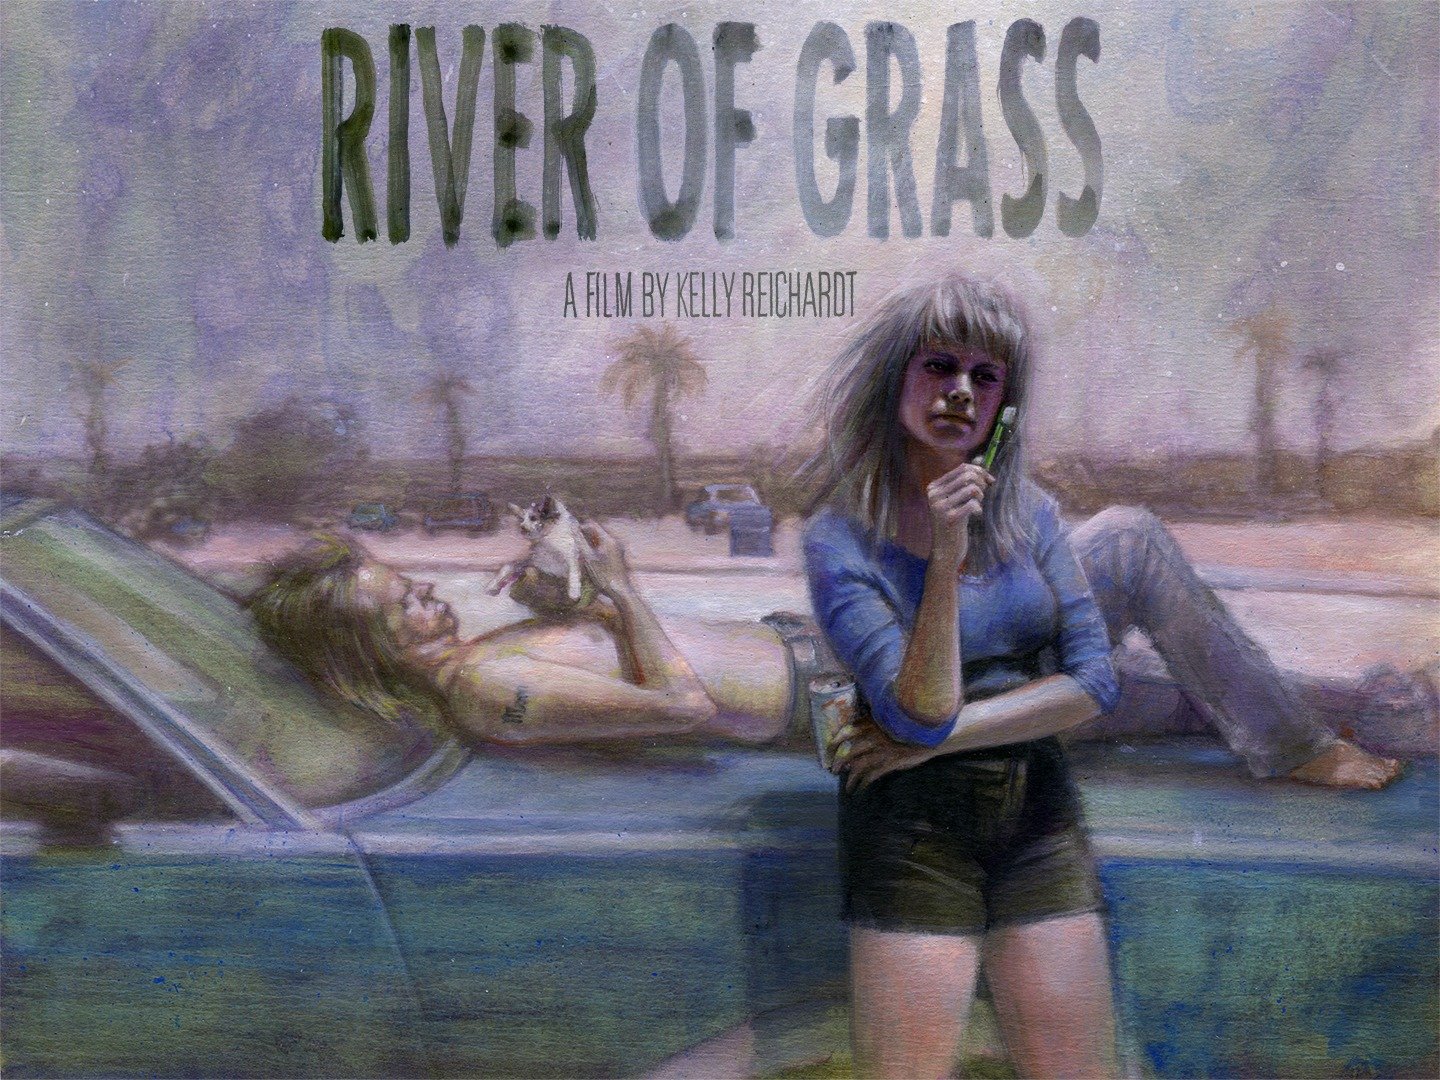 "River of Grass photo 11"